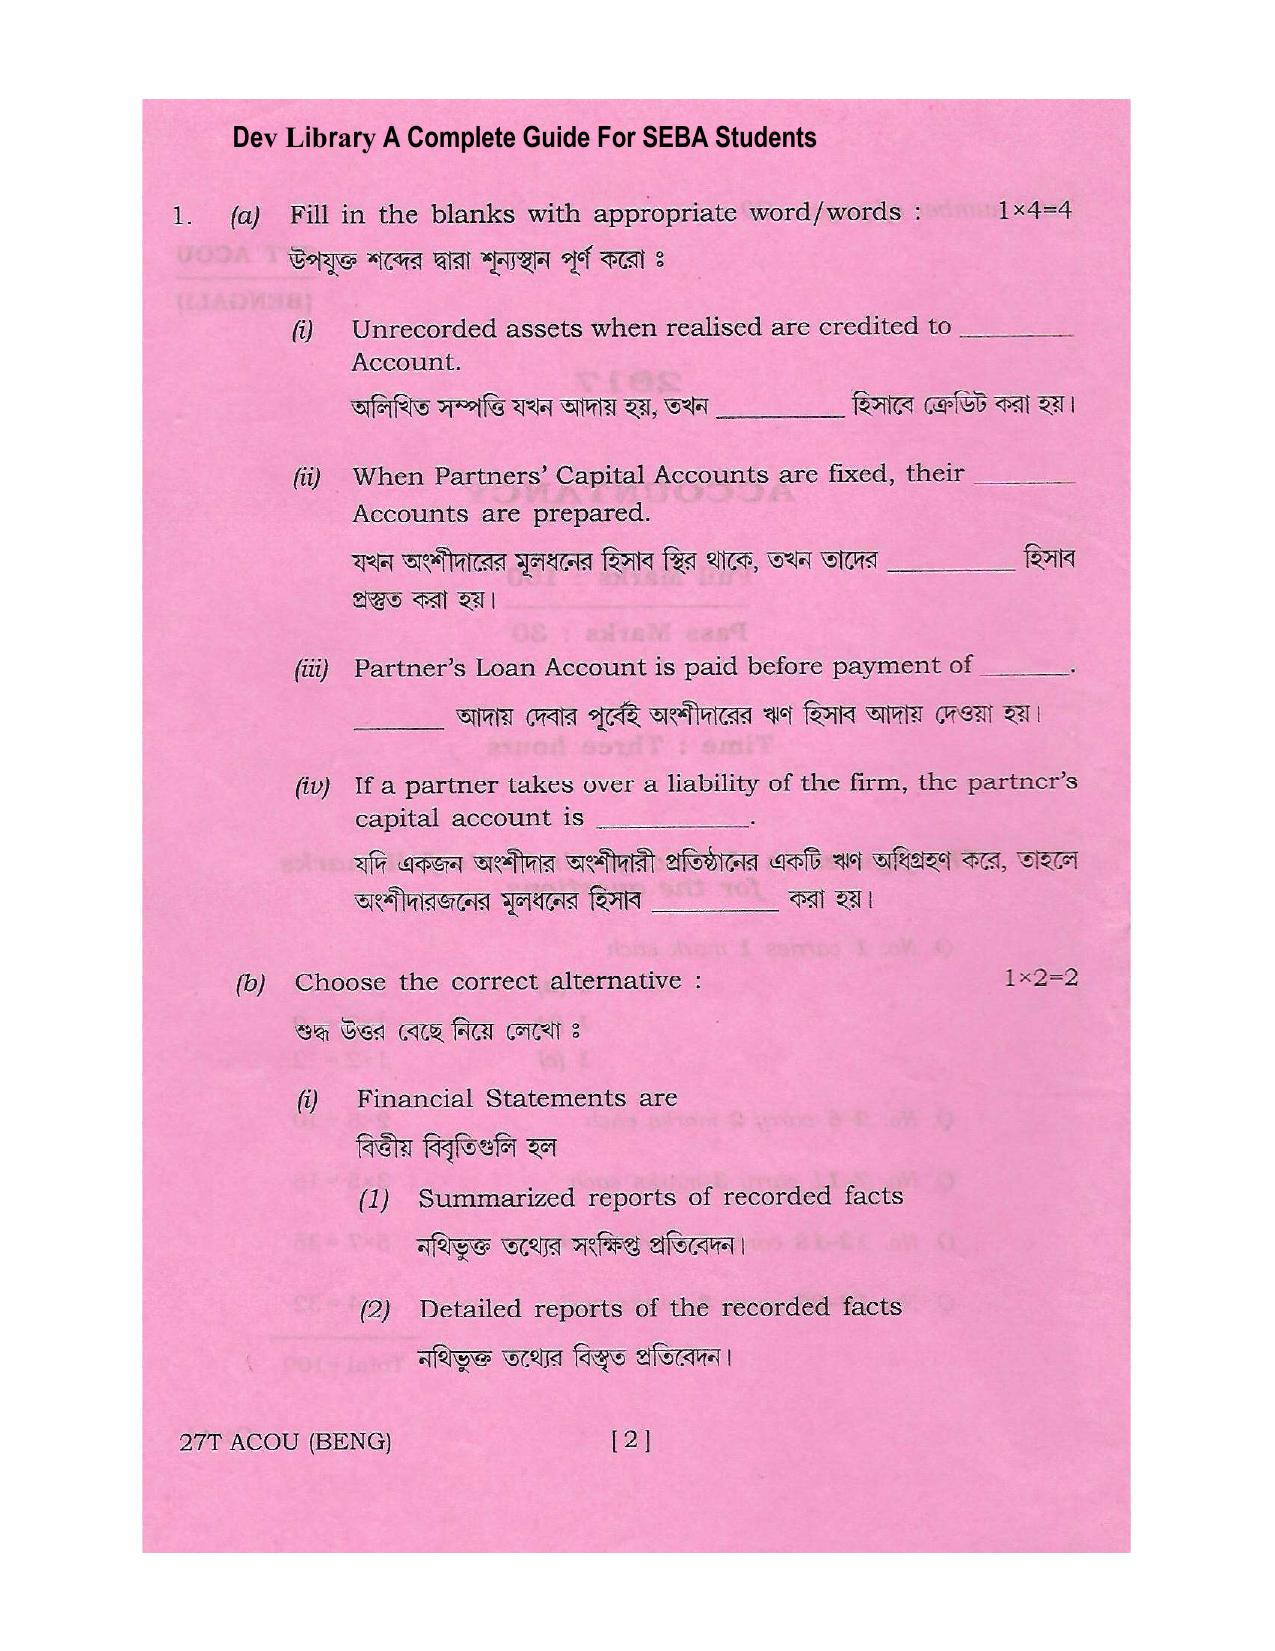 Assam HS 2nd Year Accountancy 2017 Question Paper - Page 2